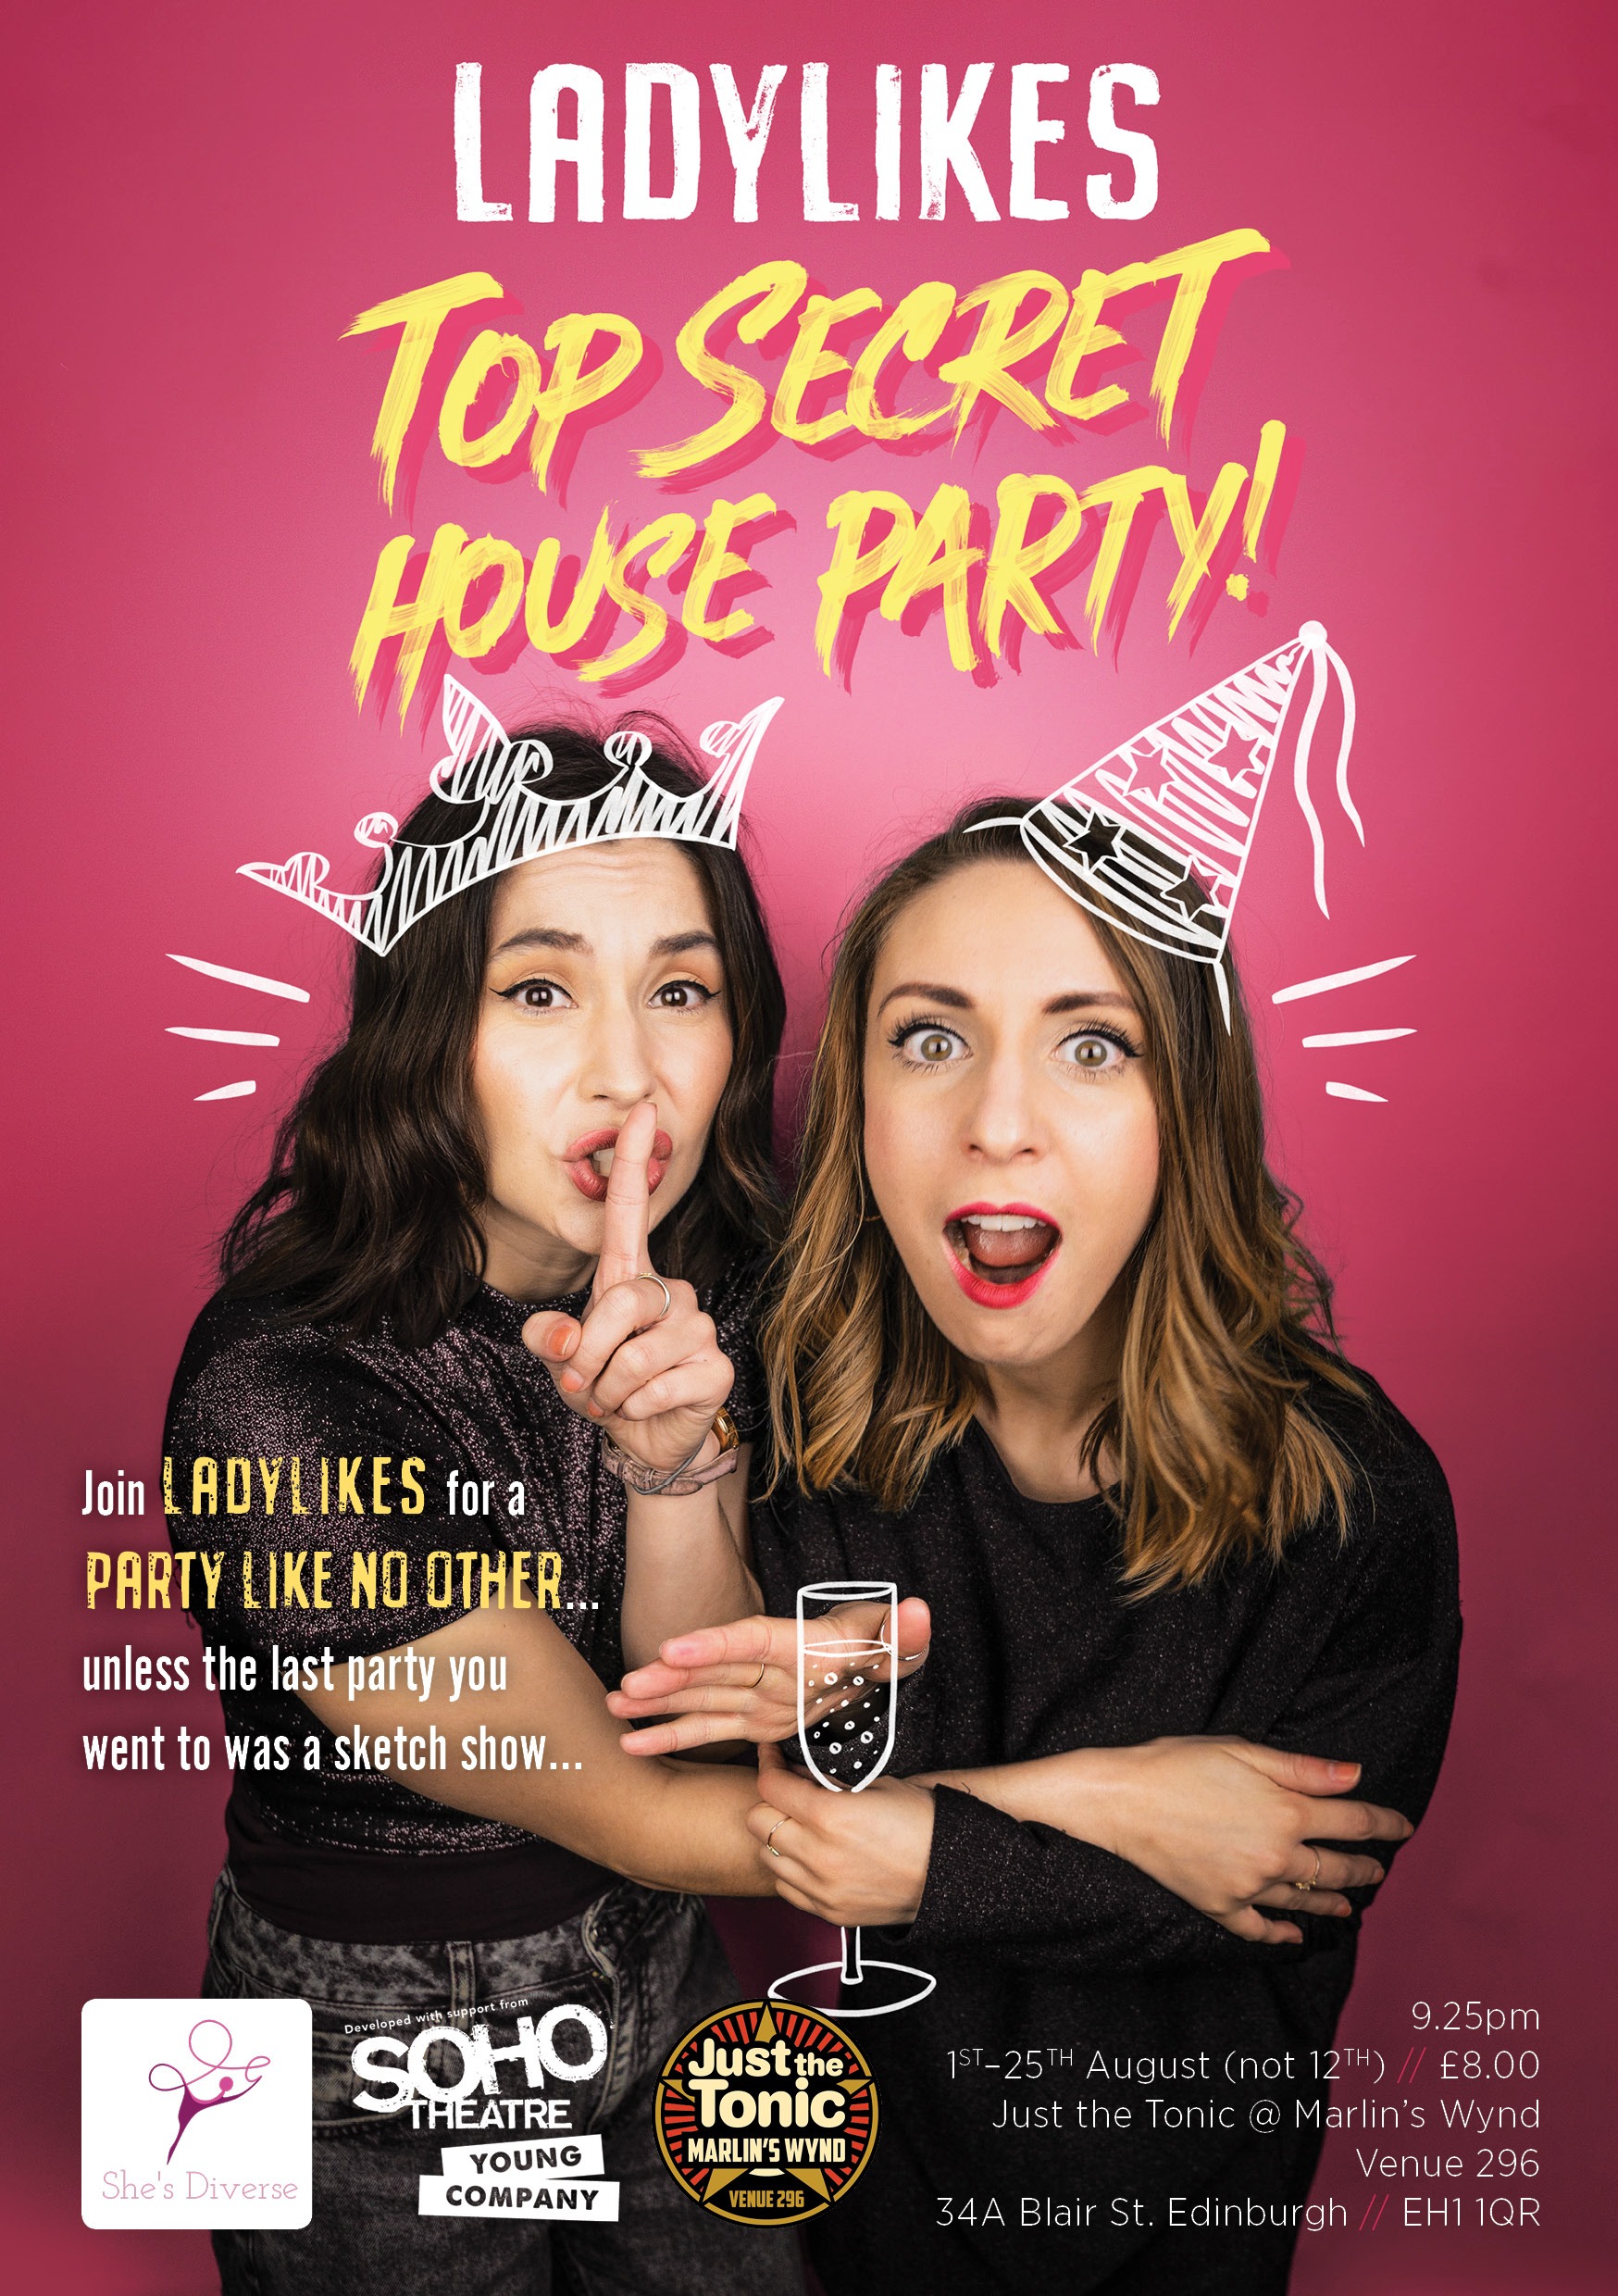 The poster for Ladylikes: Top Secret House Party!